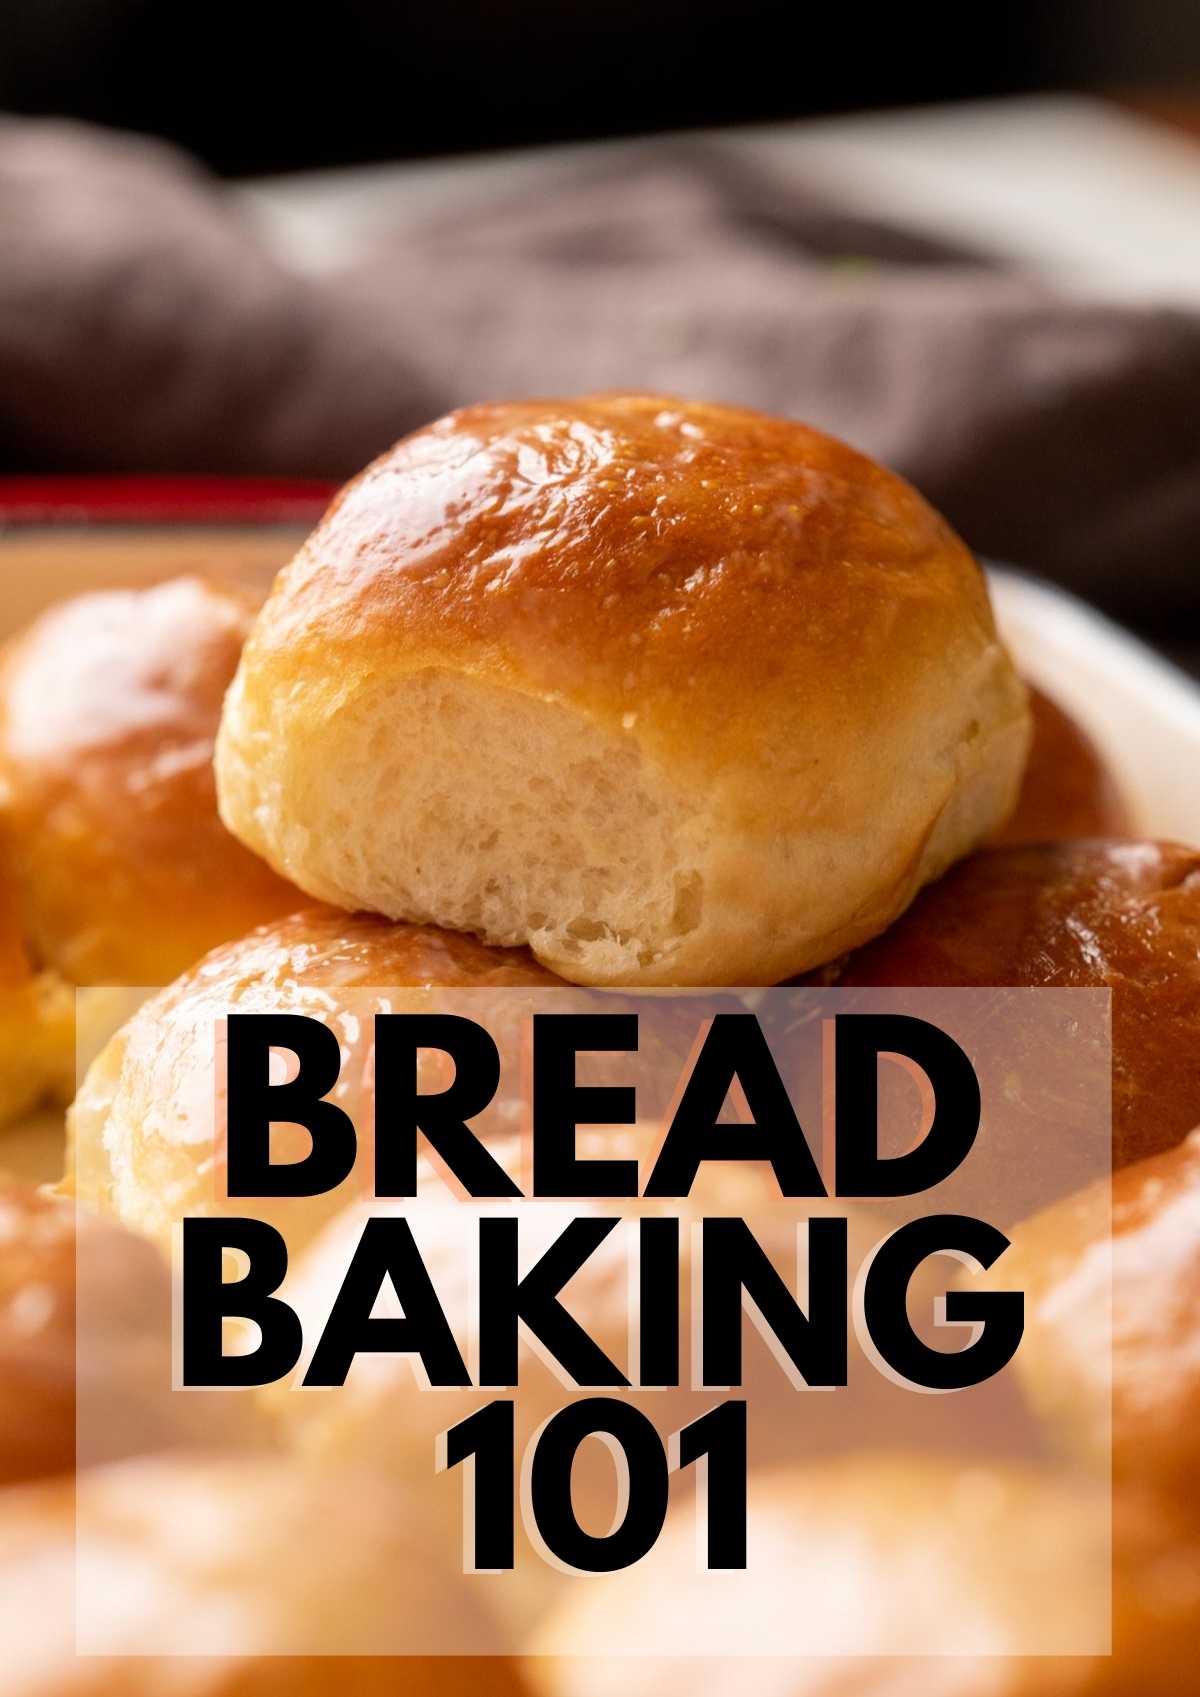 Picture of dinner rolls with text which says bread baking 101